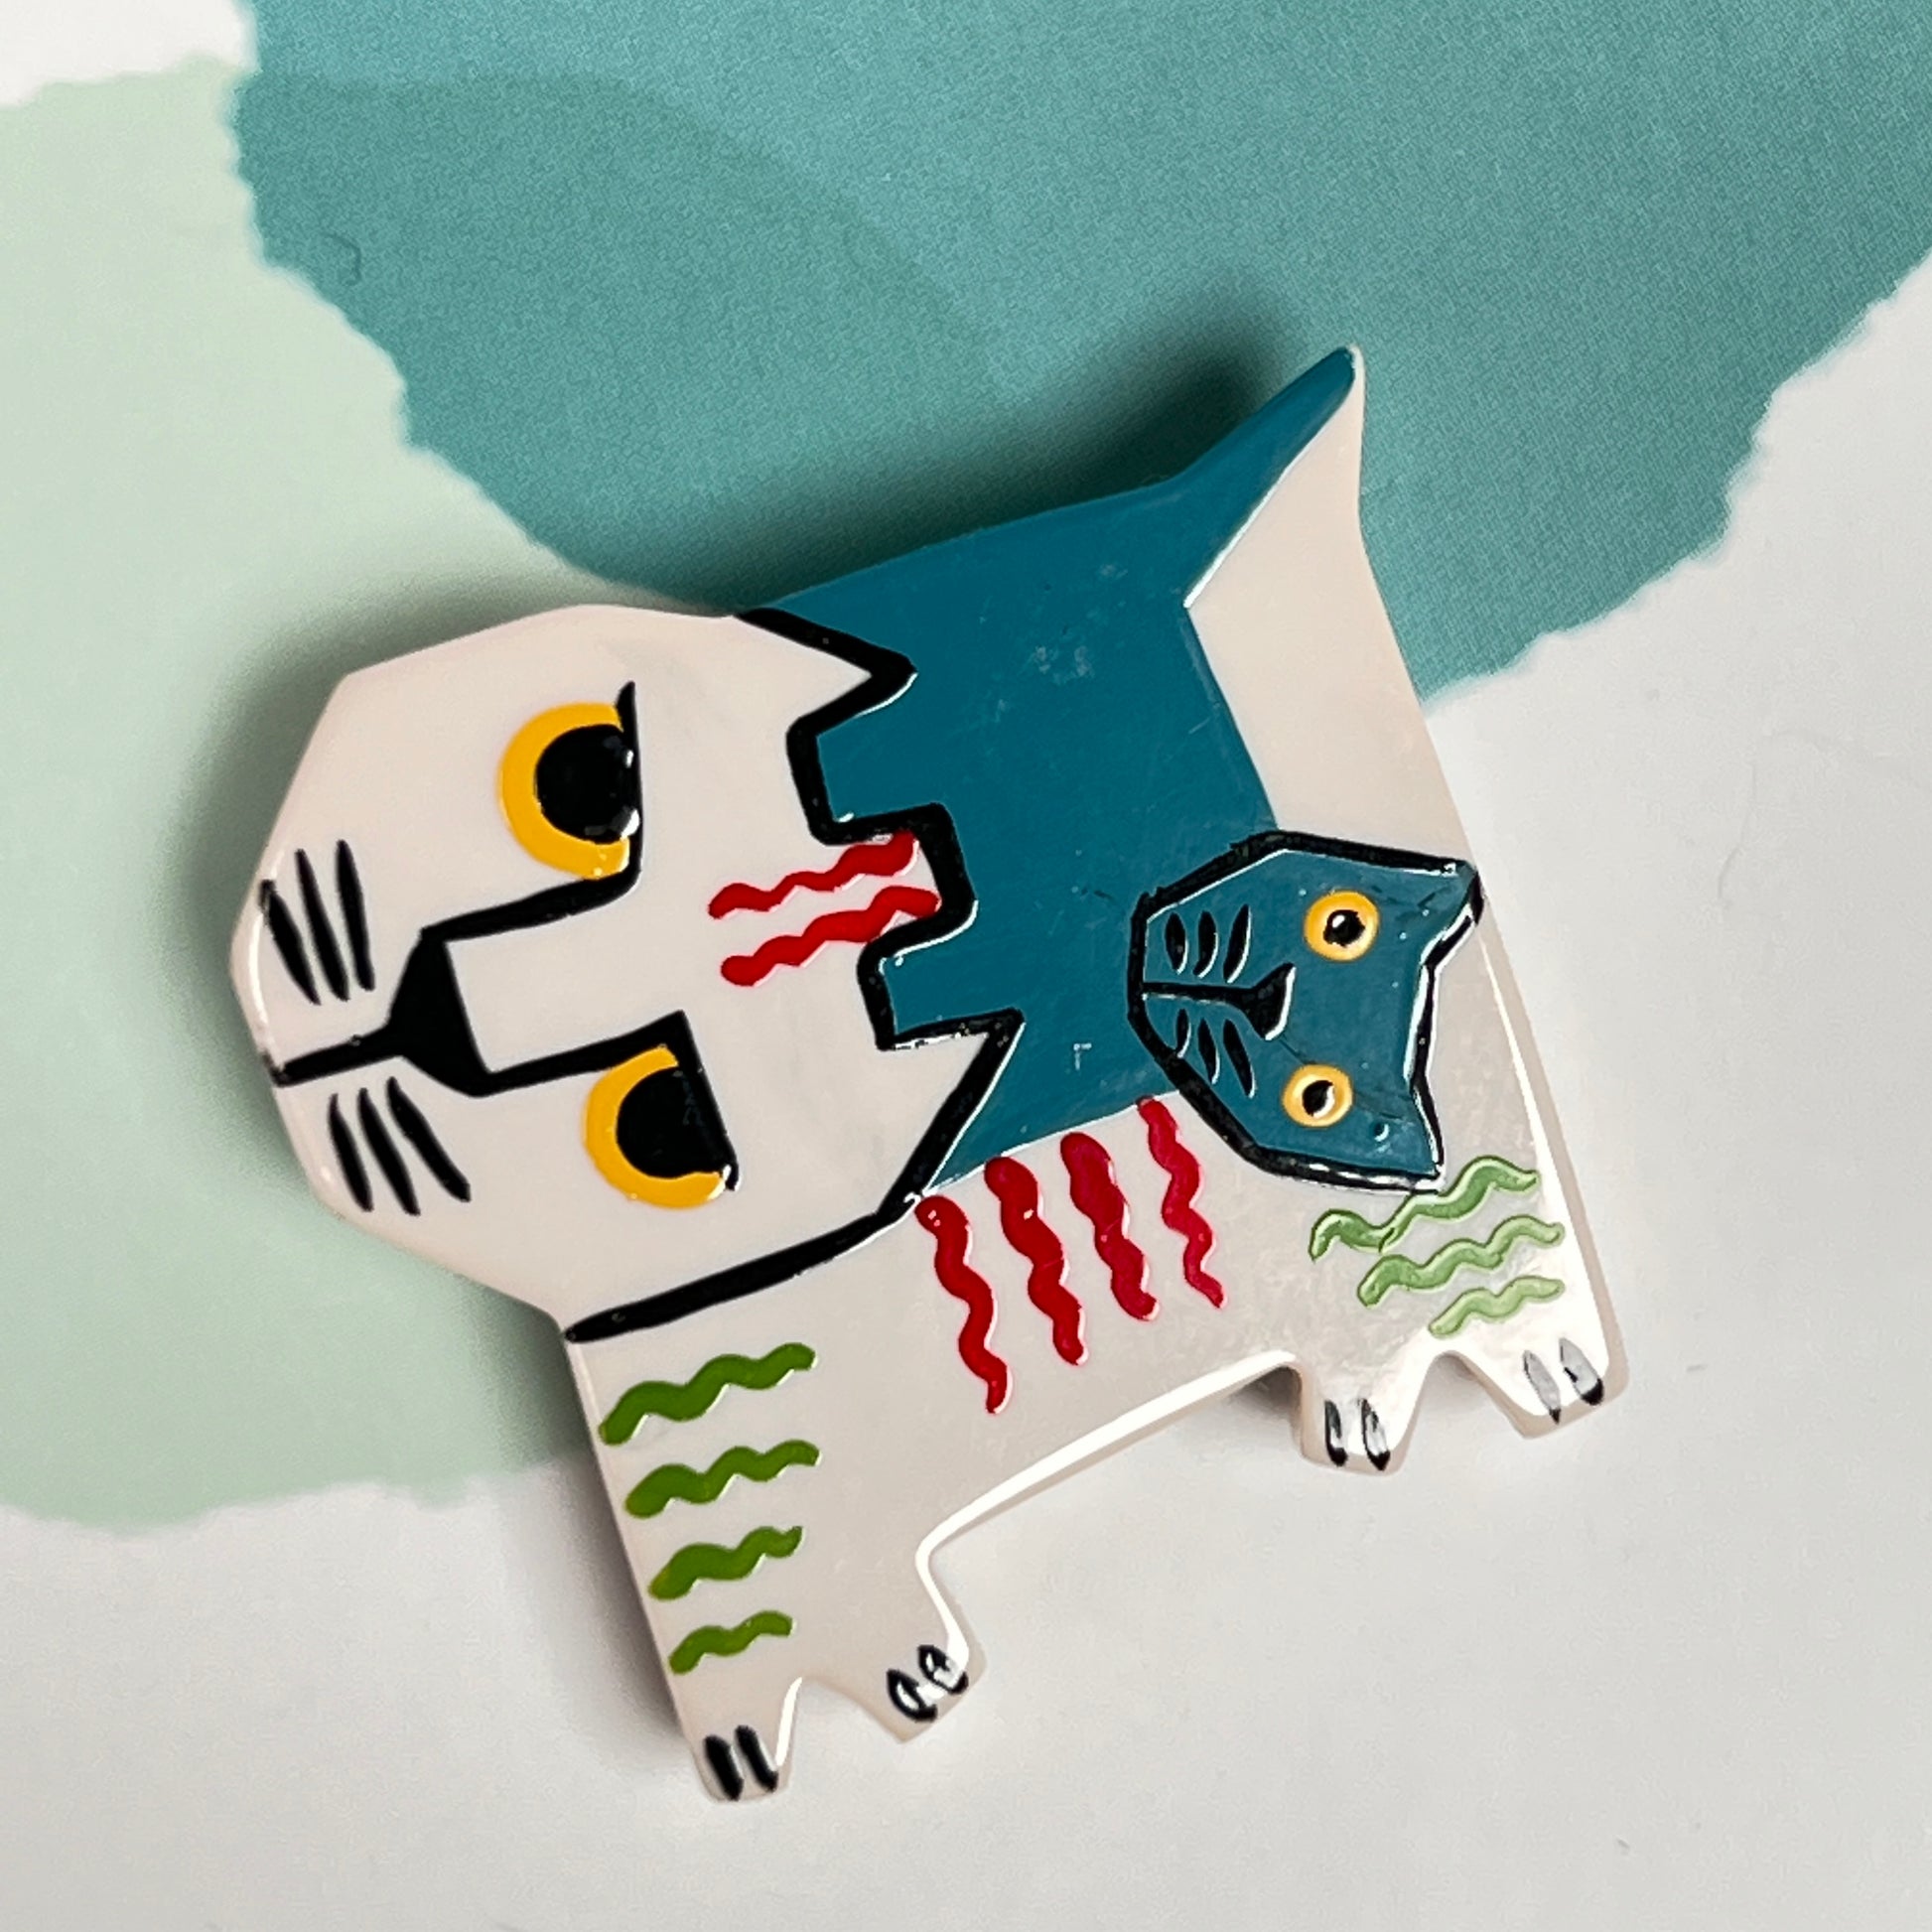 Small Ivory and Lagoon Picasso Cat Brooch in galalith